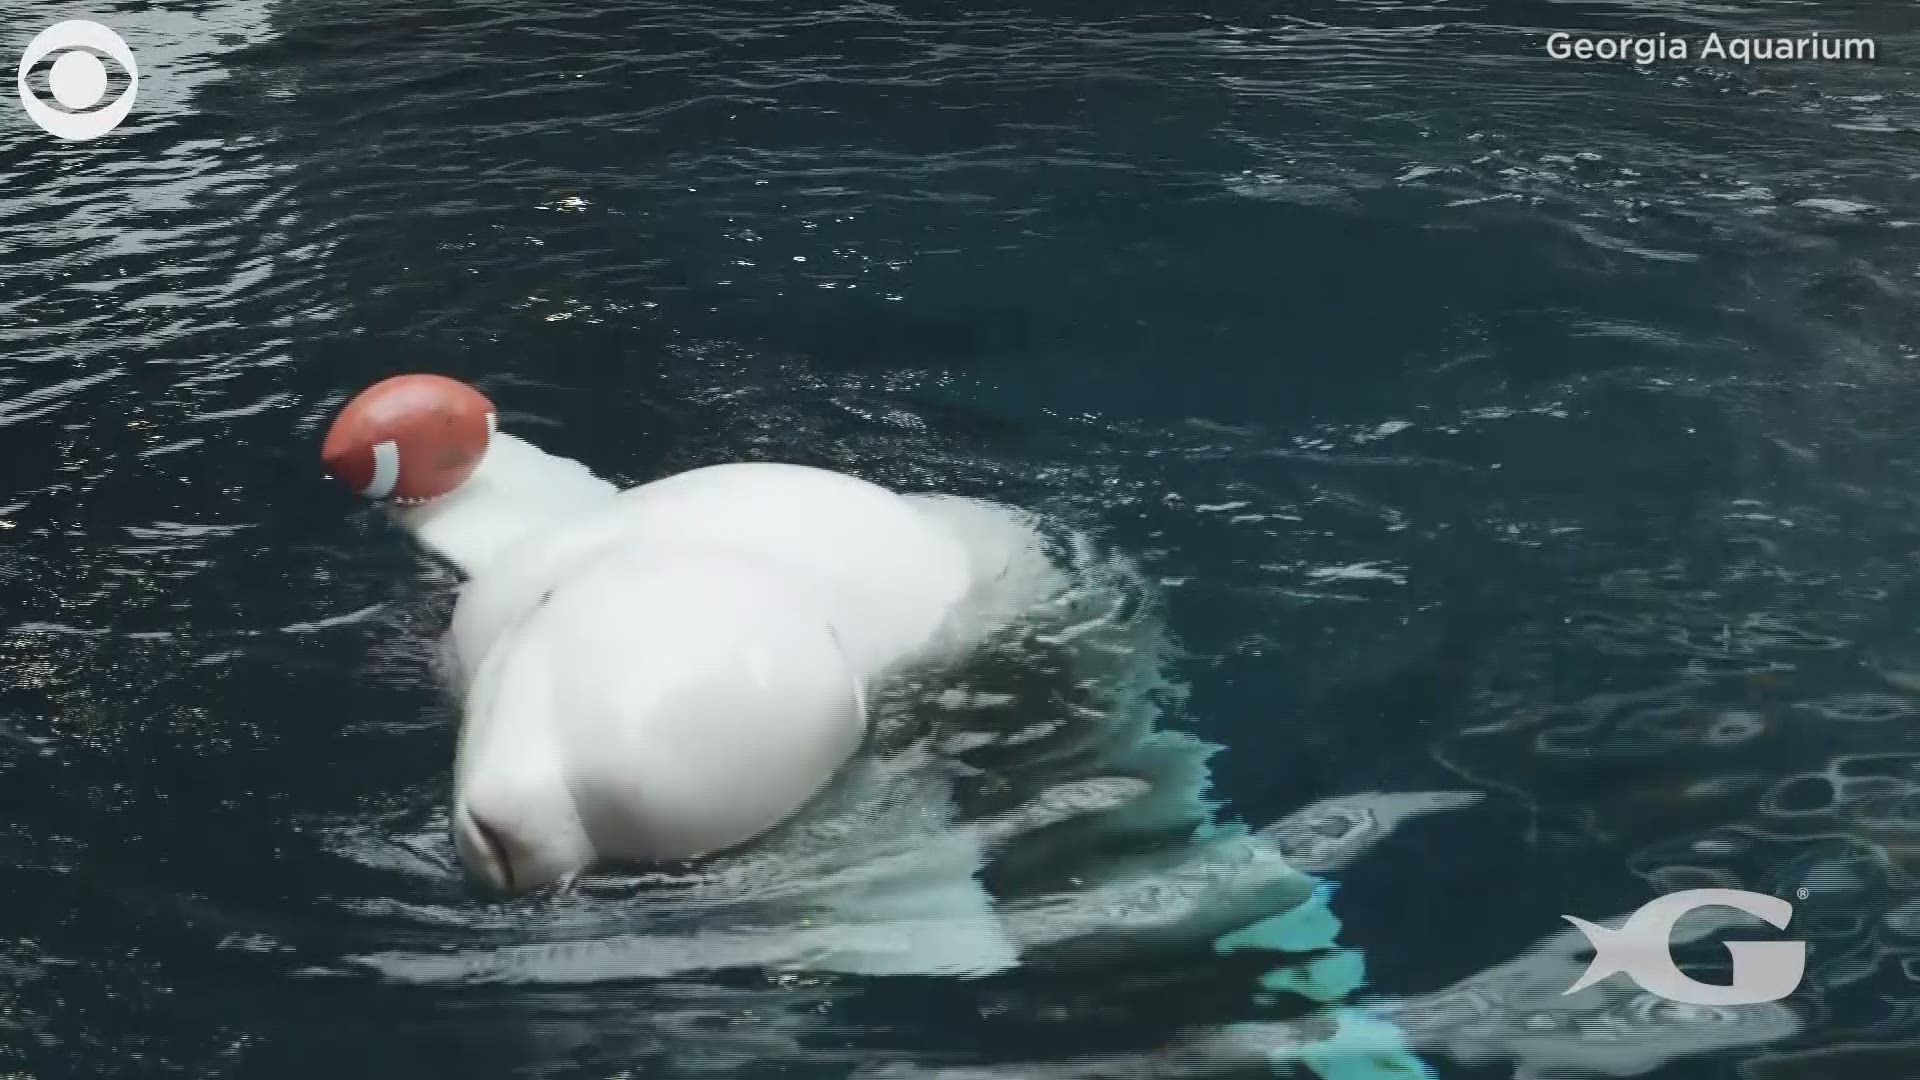 GET IN THE SPIRIT: Georgia Aquarium animals are getting ready for the Super Bowl!  Watch these adorable players show us some of their plays.